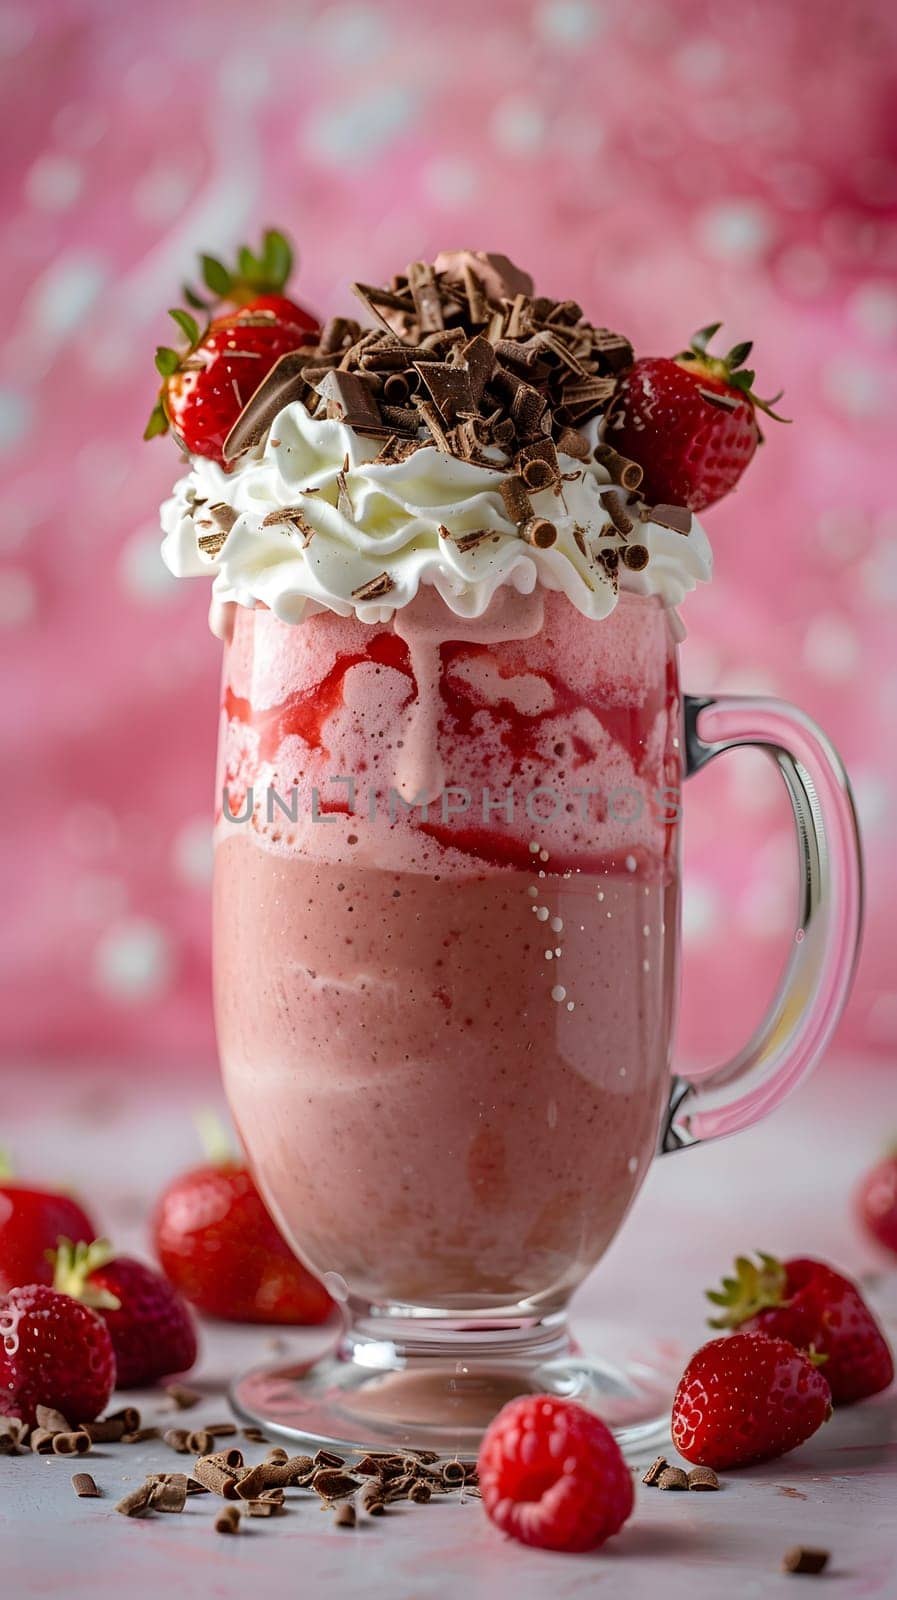 A strawberry milkshake with whipped cream and chocolate shavings in a glass by Nadtochiy